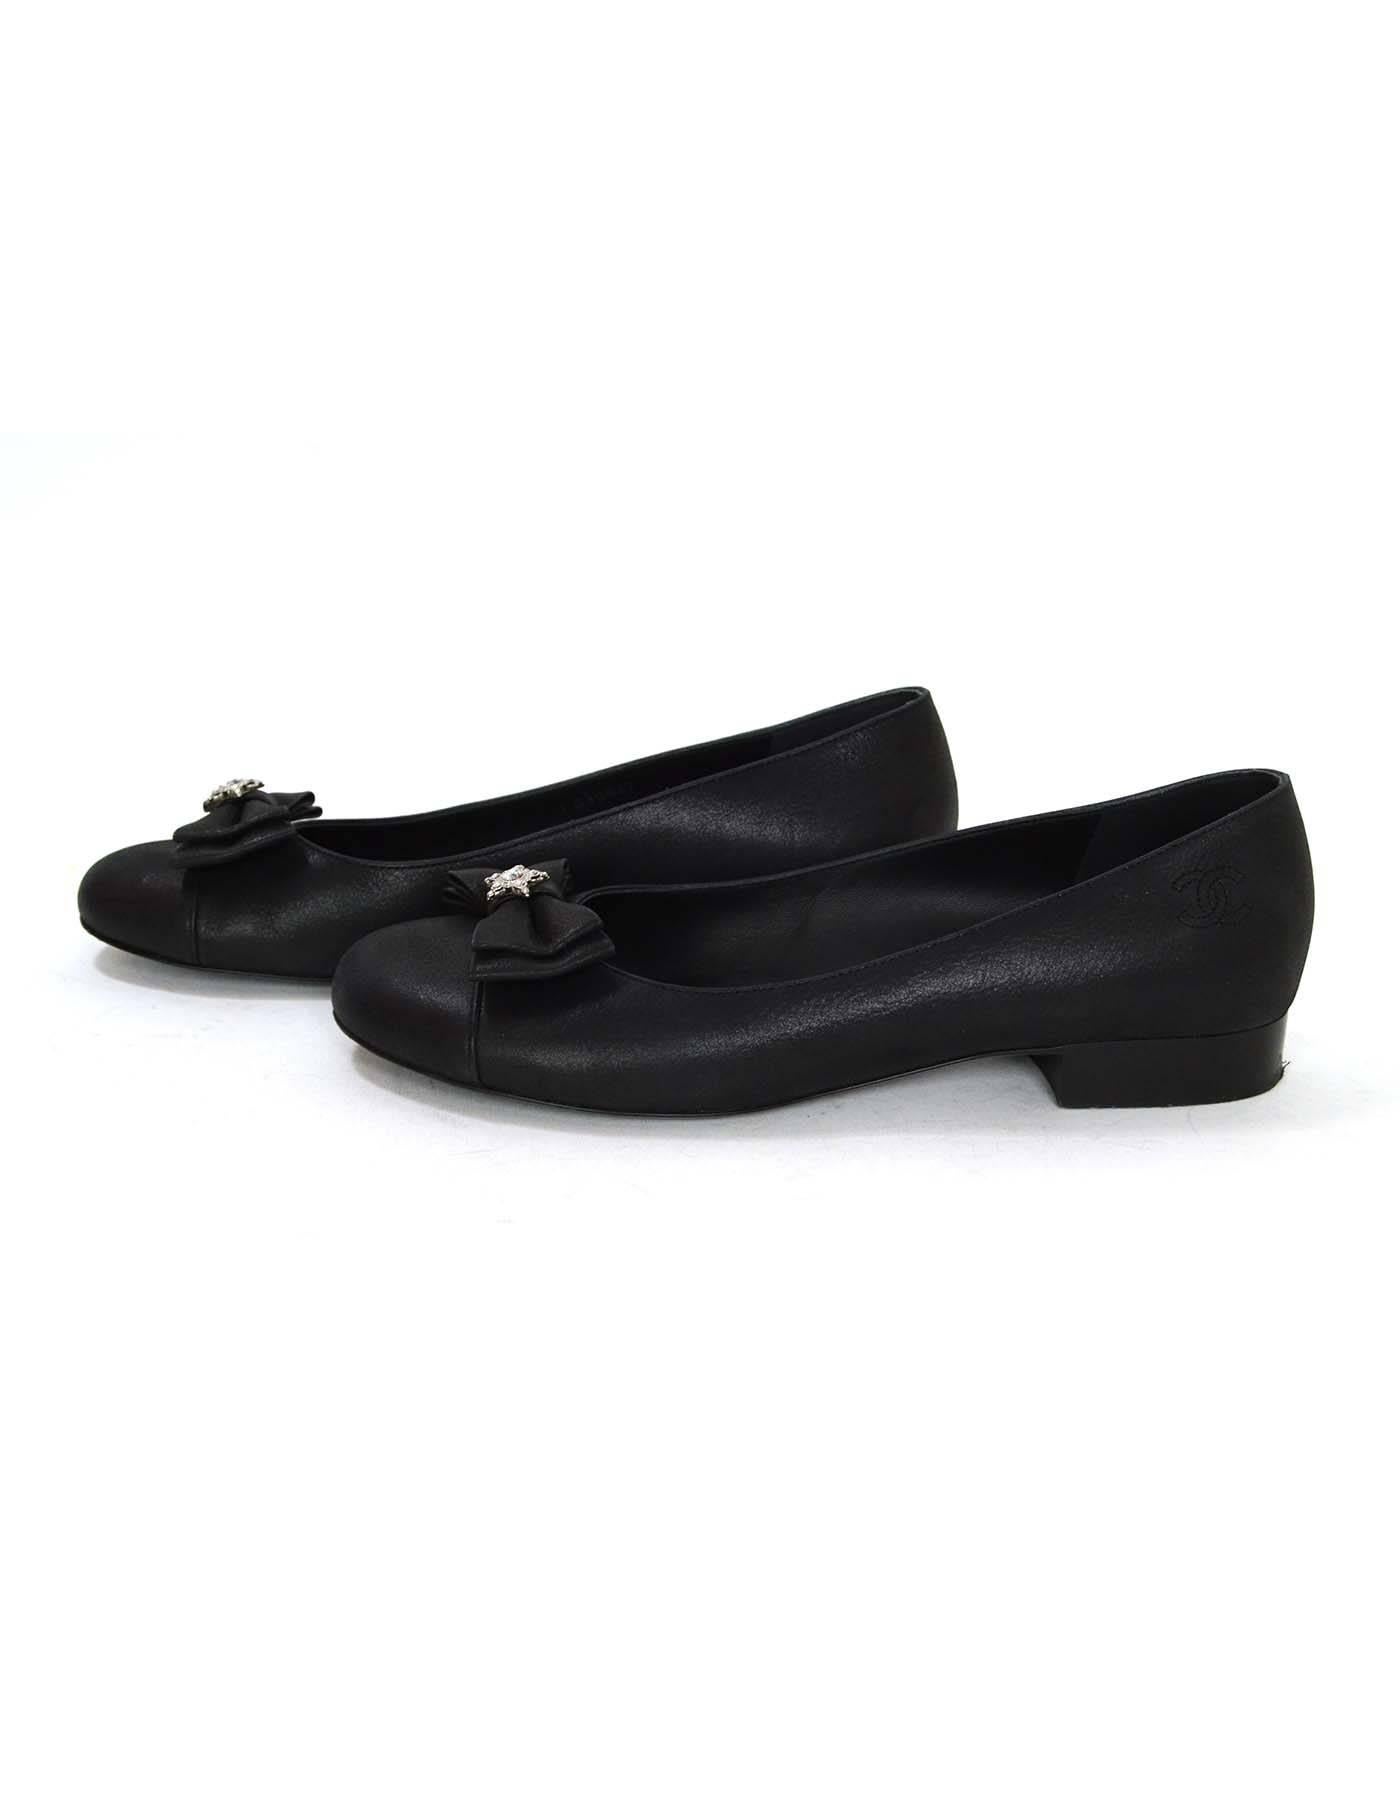 Chanel Black Iridescent Calfskin Flats 
Features bow with crystal star at toe
Made In: Italy
Color: Iridescent black
Materials: Calfskin
Closure/Opening: Slide on
Sole Stamp: CC Made In Italy 38
Retail Price: $825 + tax
Overall Condition: